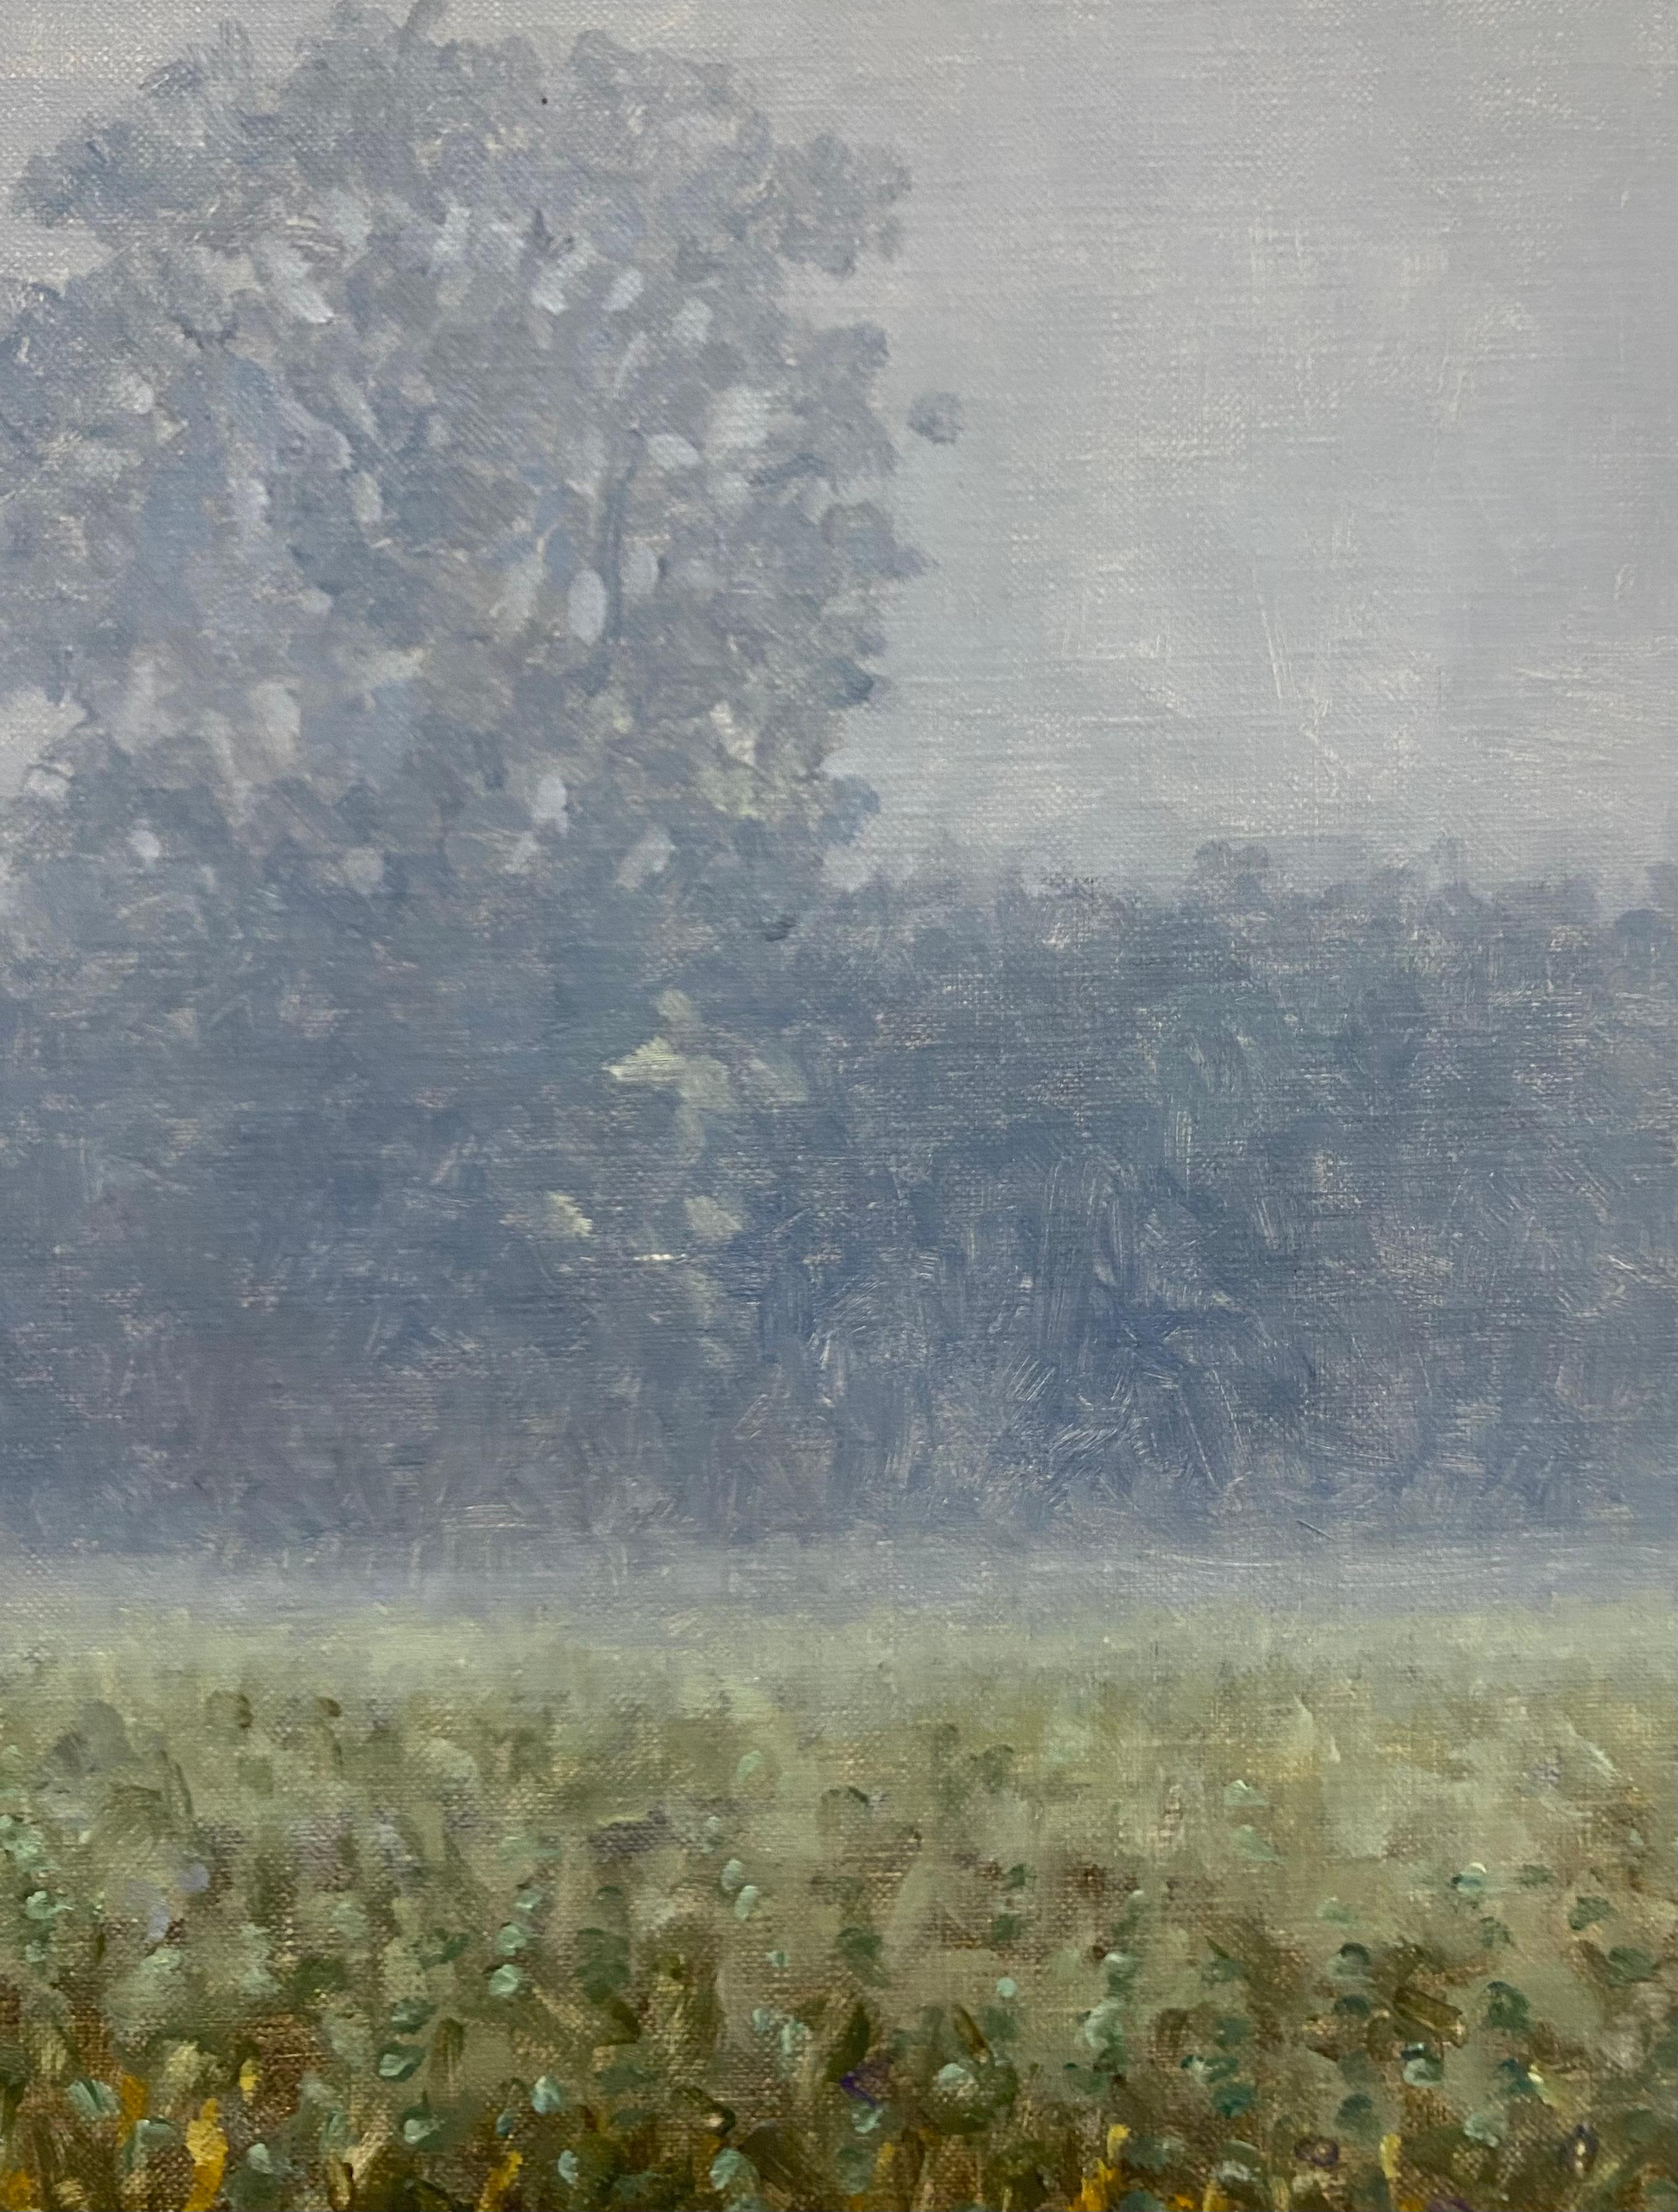 A peaceful outdoor scene of a delicately painted field and trees shrouded in fog, beautifully capturing the idyllic feel of late August. Signed, dated and titled on verso.

The paintings of Thomas Sarrantonio seek to mediate between realms of